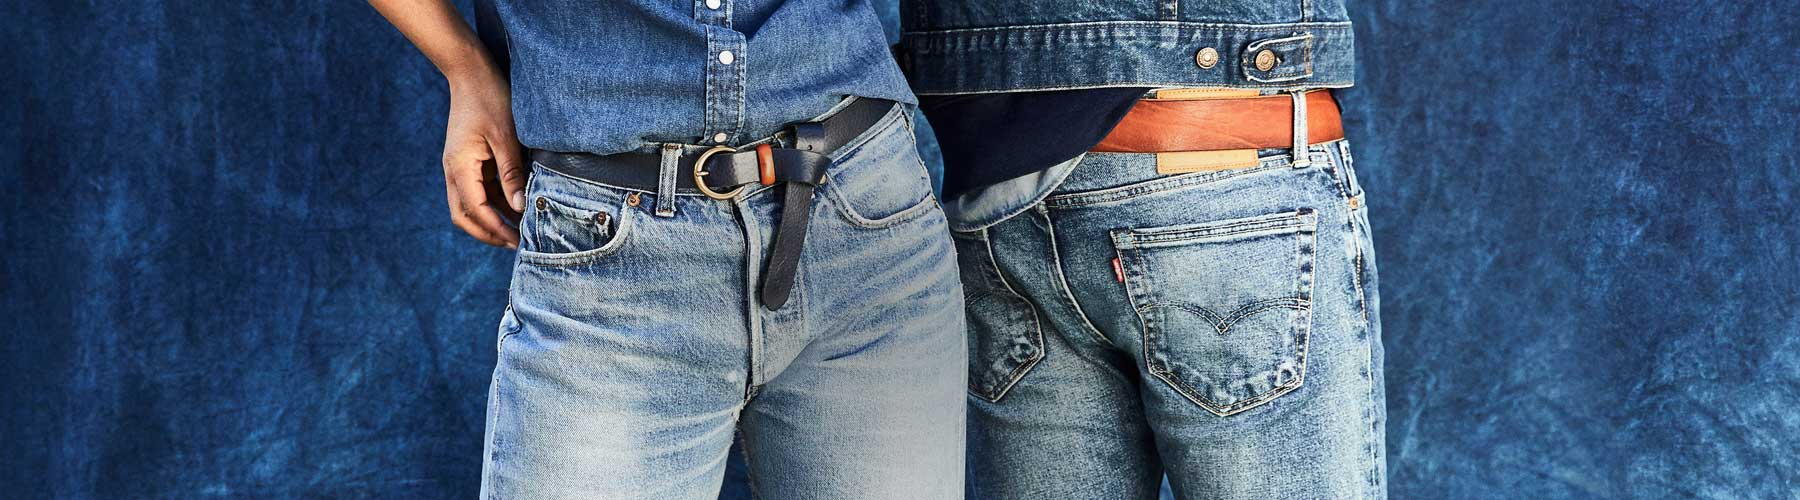 Straight Jeans Manufacturers in Delhi